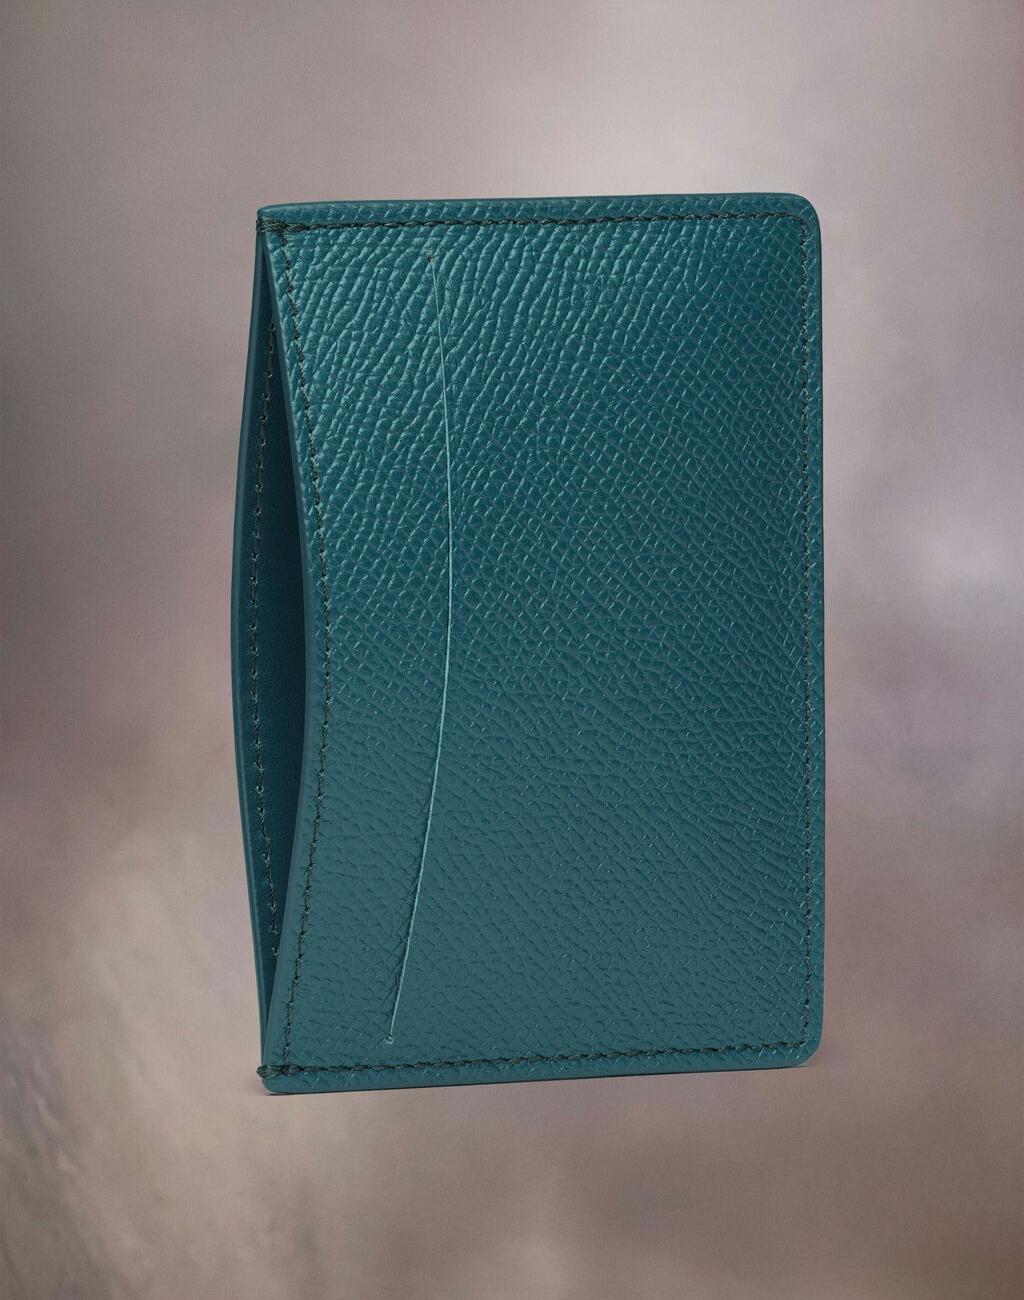 Green leather small card holder